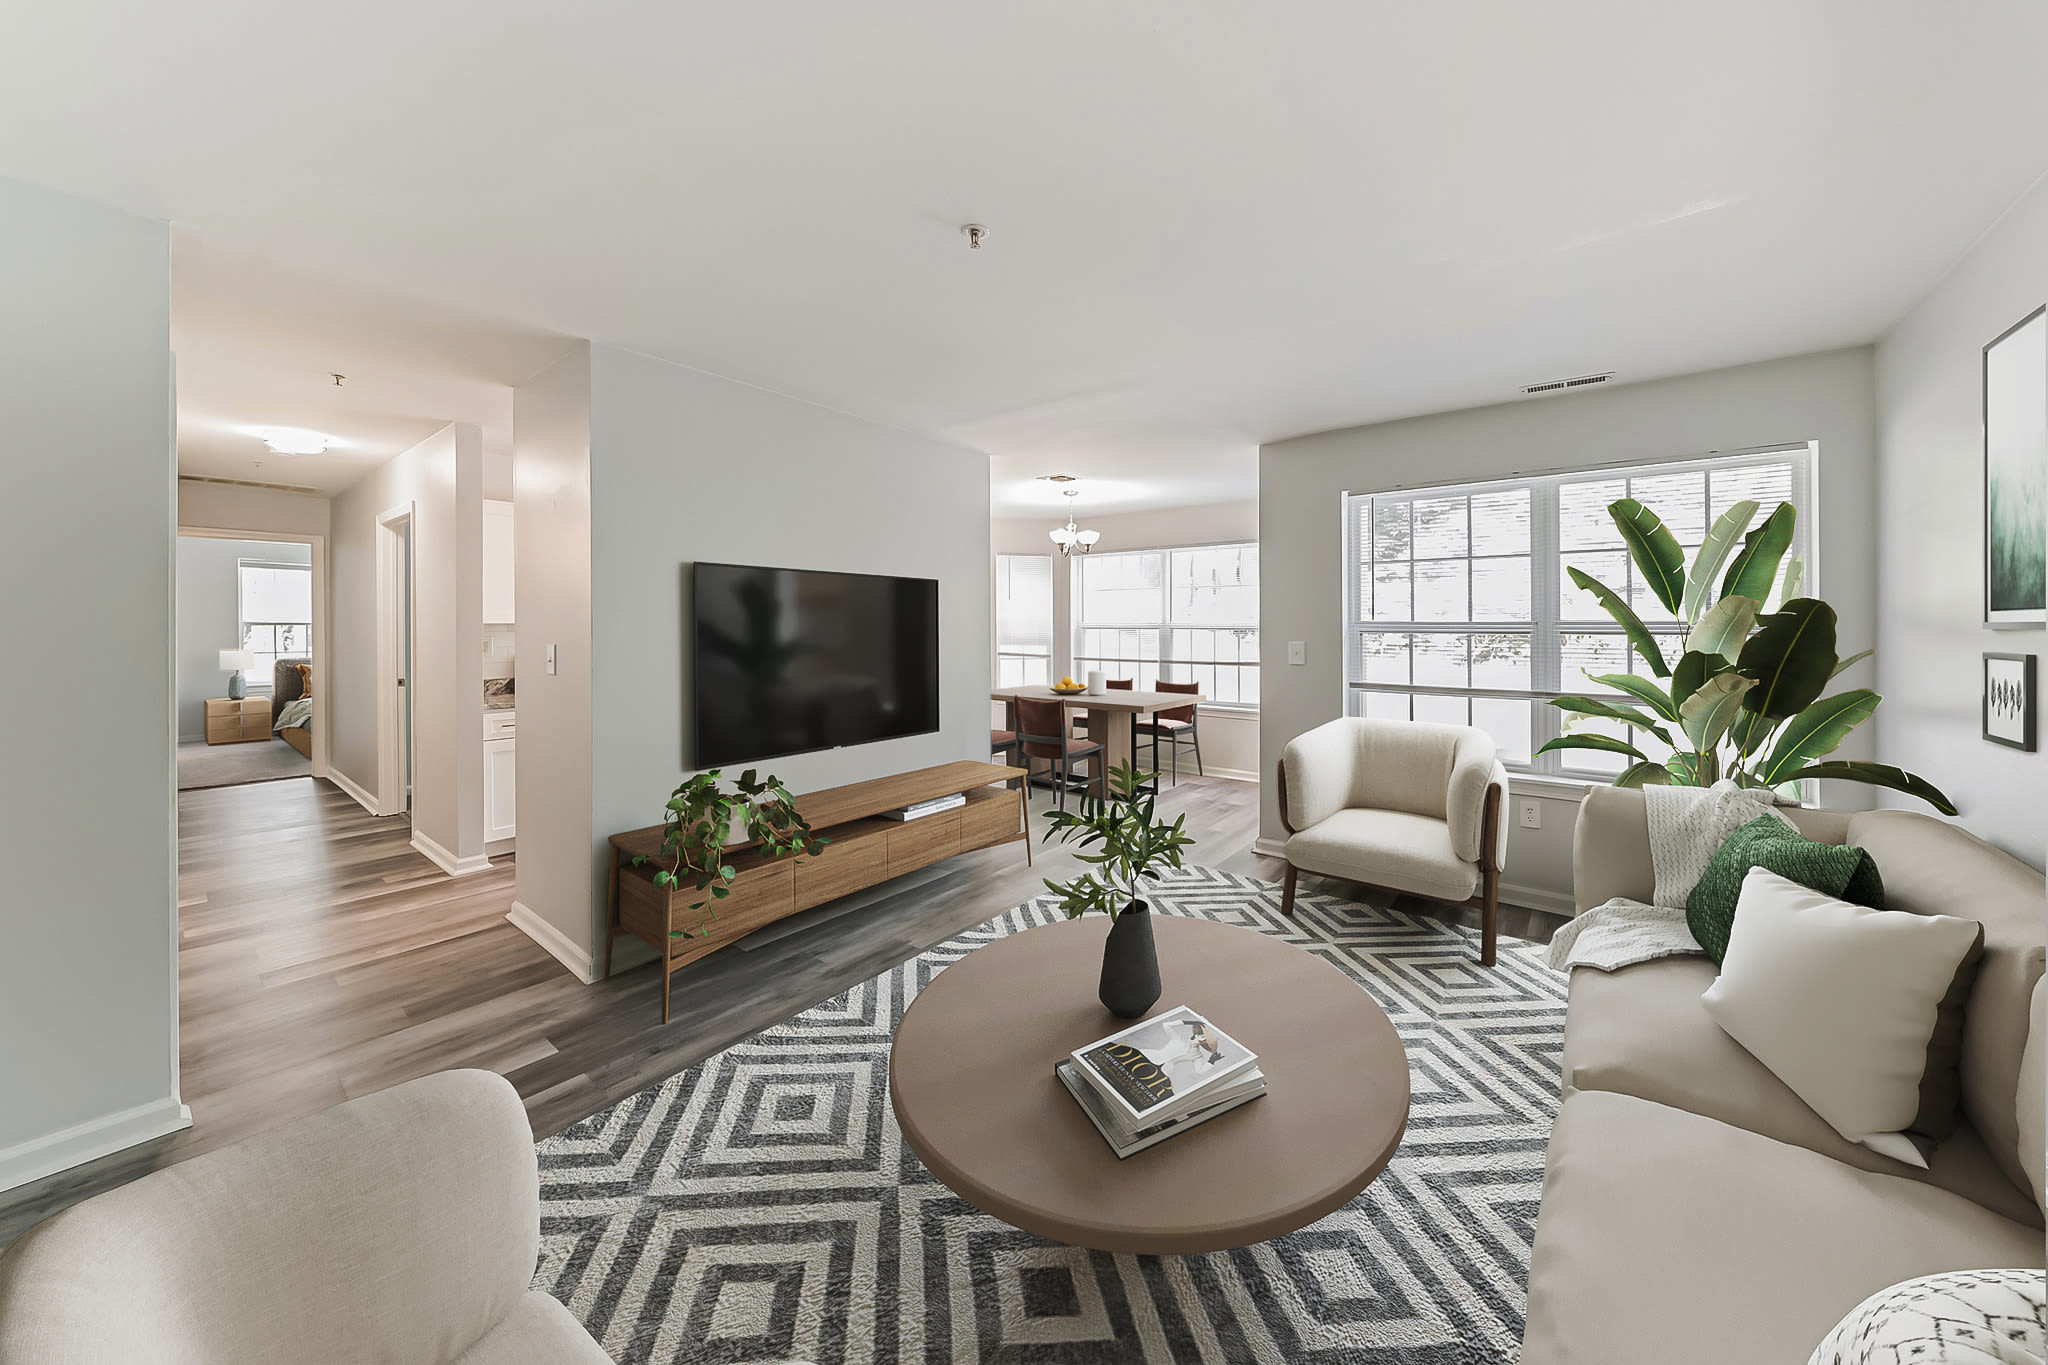 Our Modern Apartments in East Haven, Connecticut showcase a Living Room